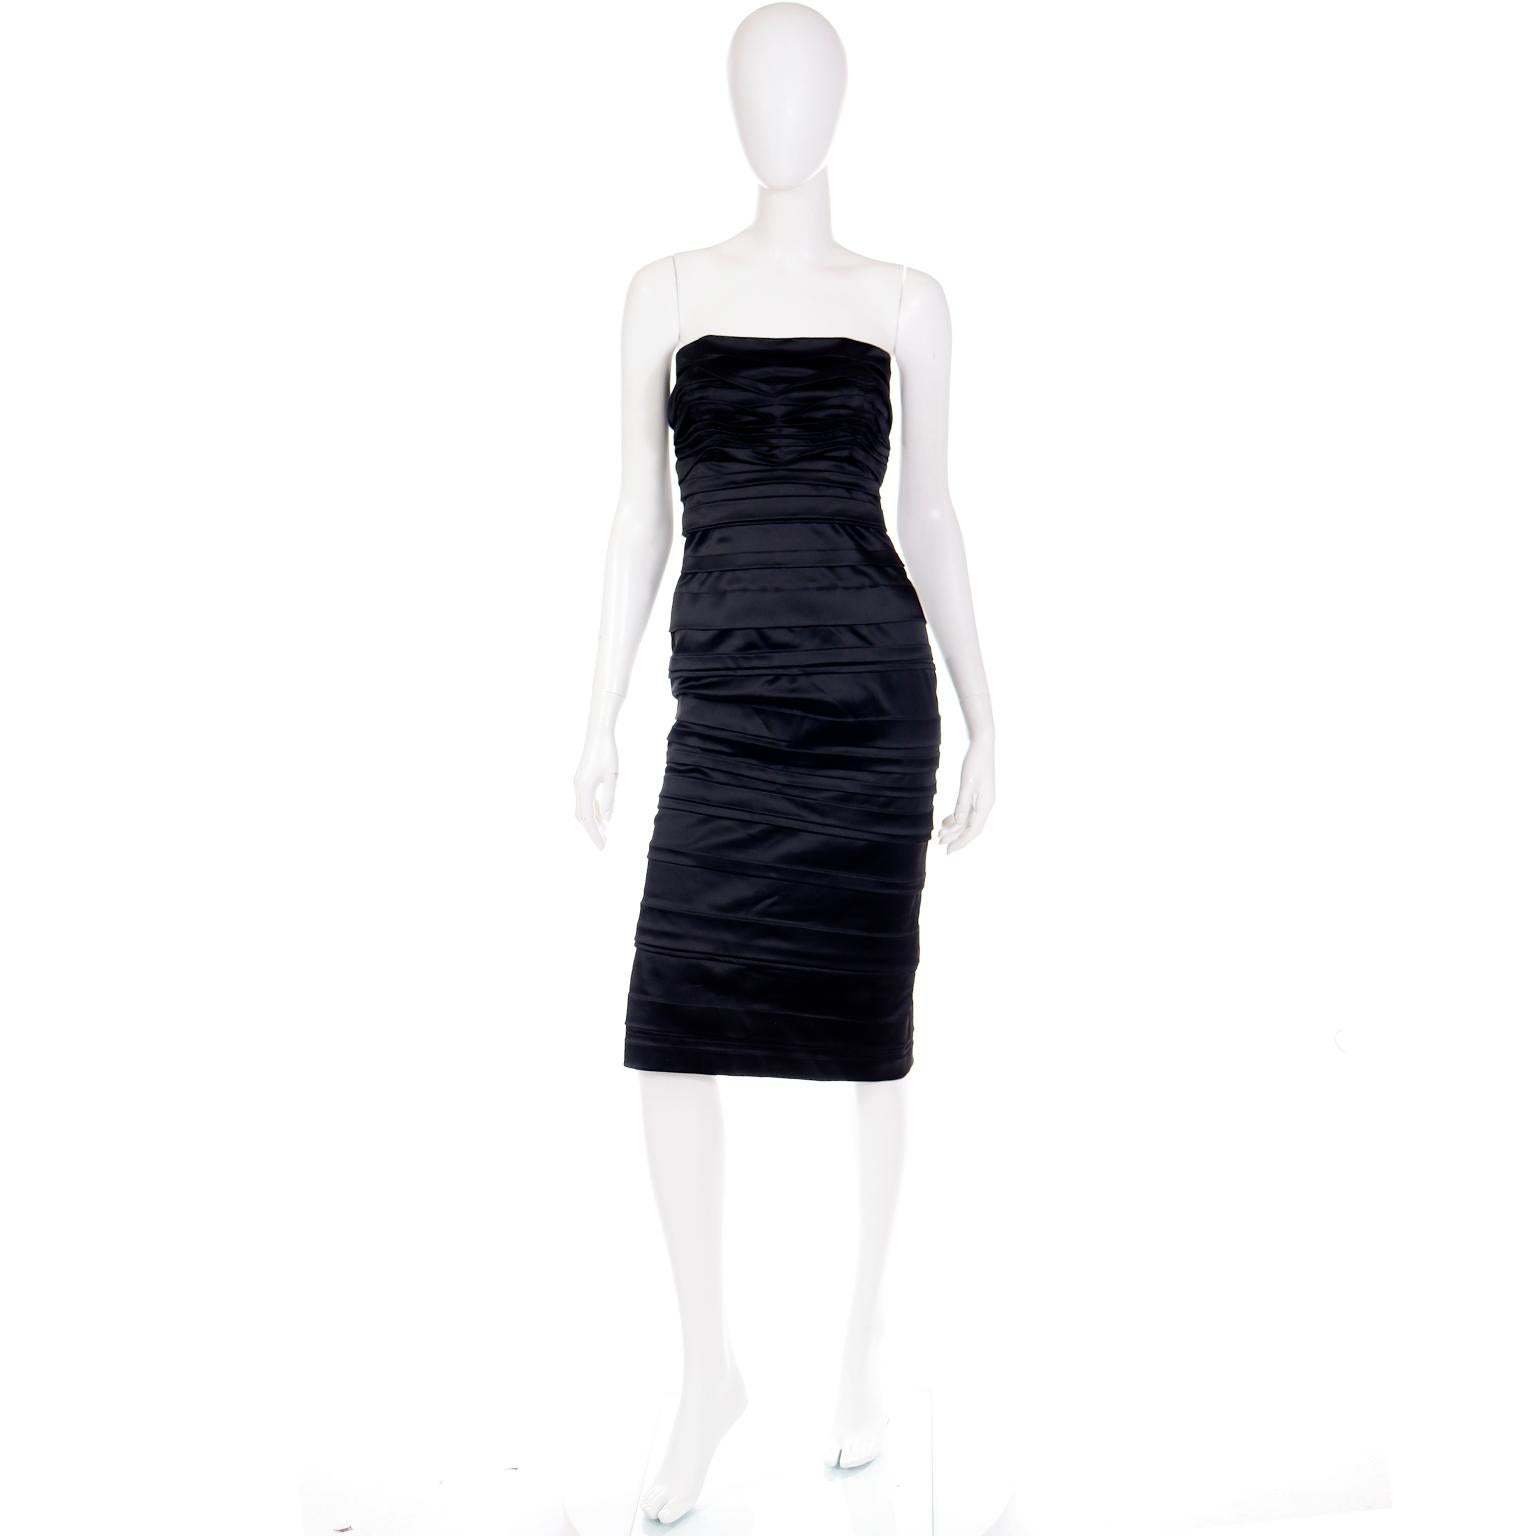 This deadstock Alberta Ferretti strapless black satin evening dress has intricate gathering or ruching throughout and enough stretch to hug the body and create a beautiful silhouette. Far from simple, this dress has so much style and is so